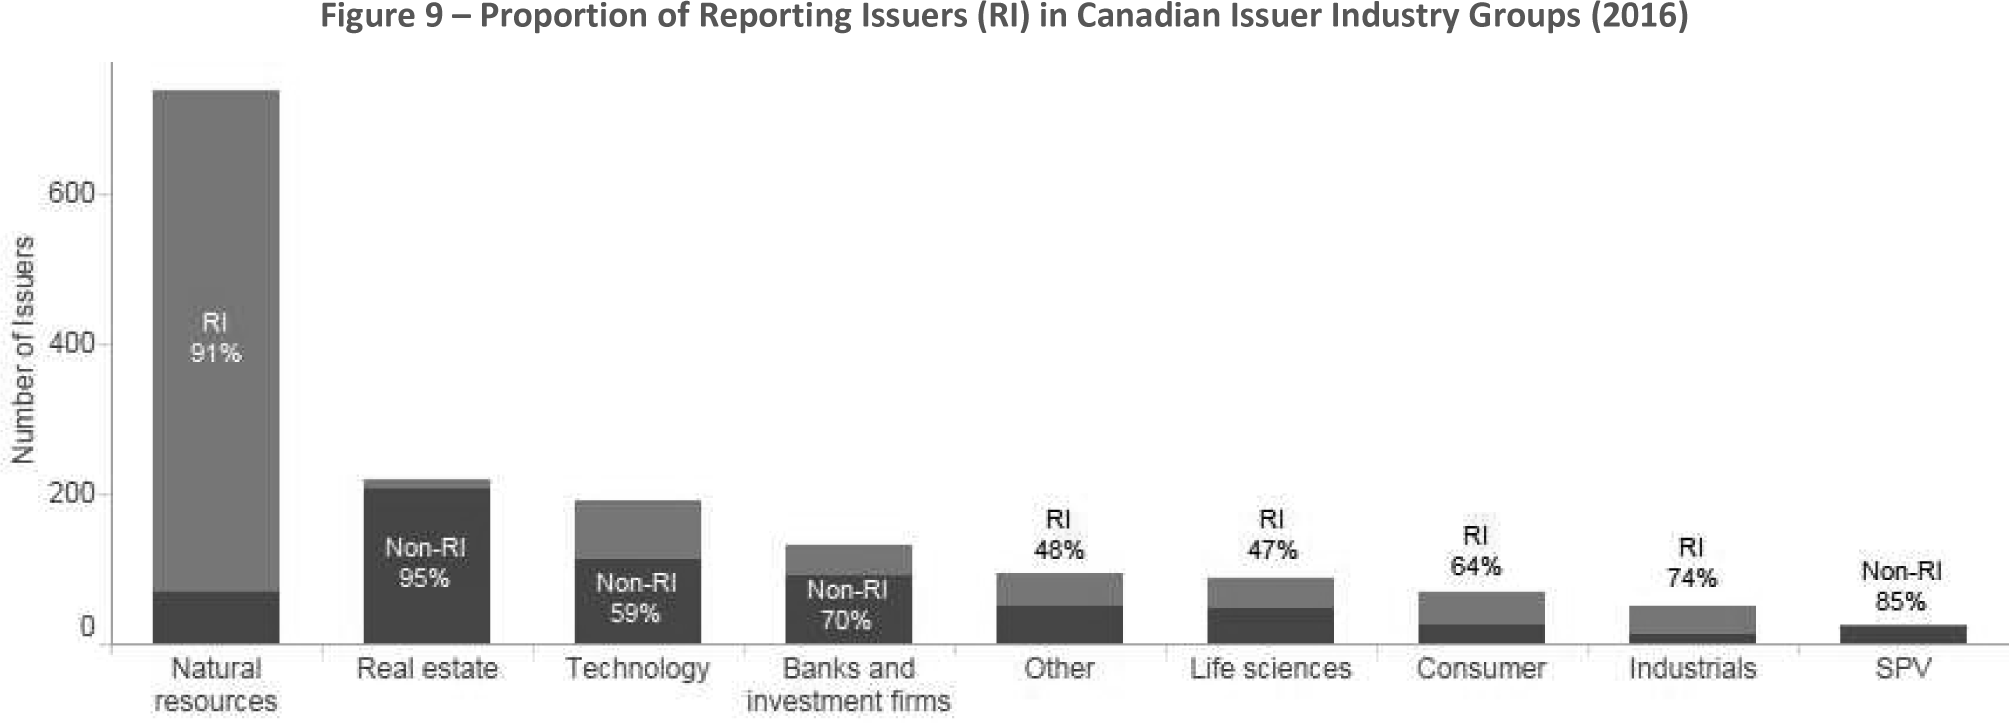 Figure 9 -- Proportion of Reporting Issuers (RI) in Canadian Issuer Industry Groups (2016)